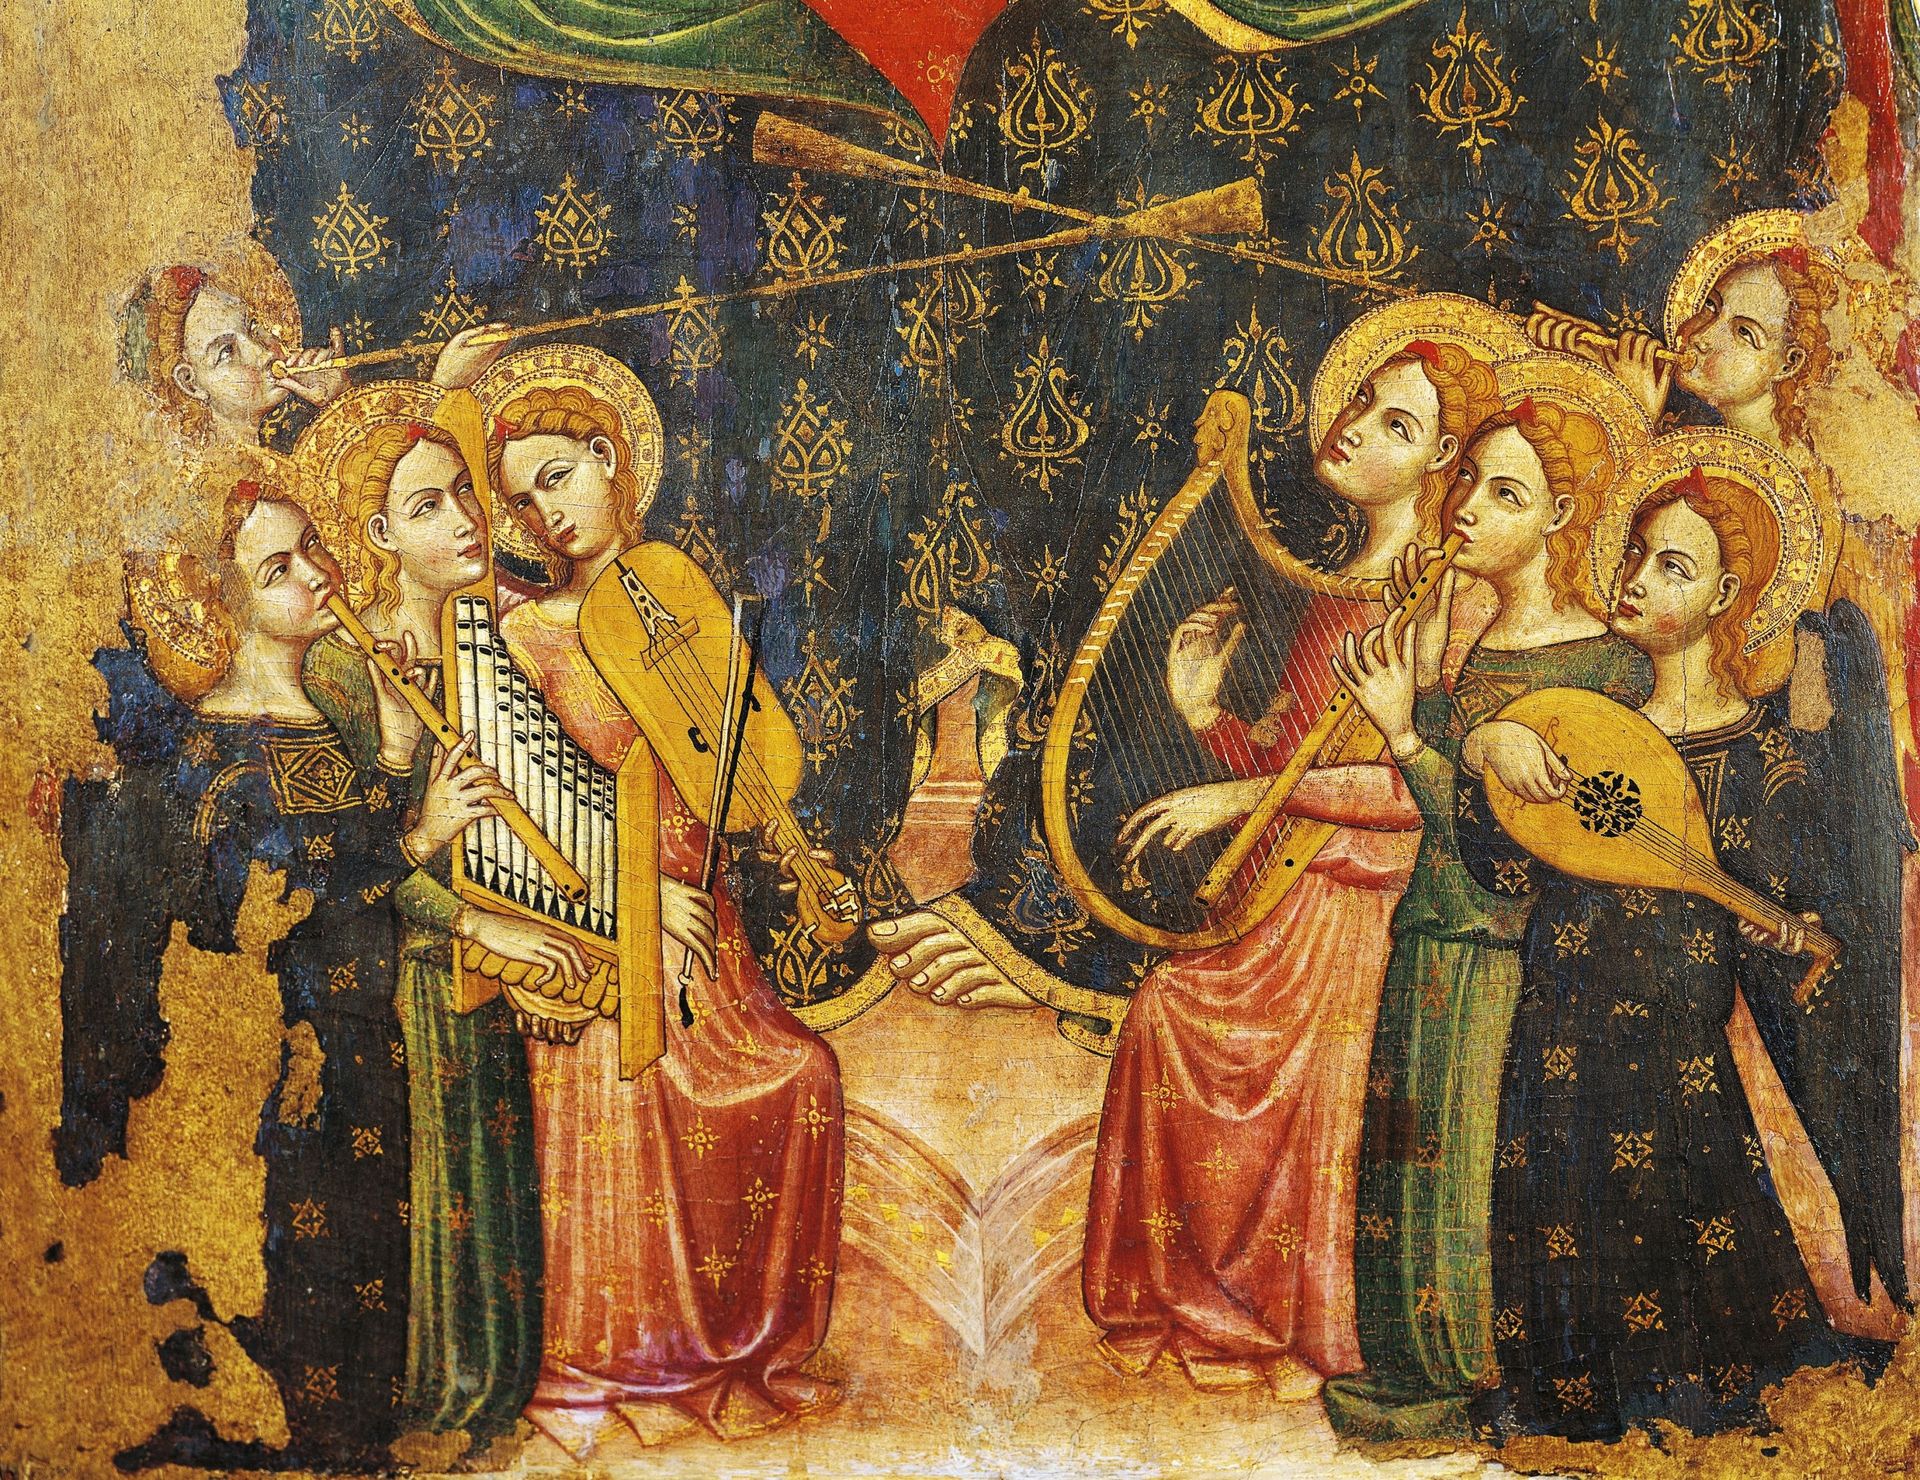 Angels with instruments, detail from the Coronation of the Virgin, 13th-14th century, by the Master of the Corleone Altarpiece. (Photo by DeAgostini/Getty Images)